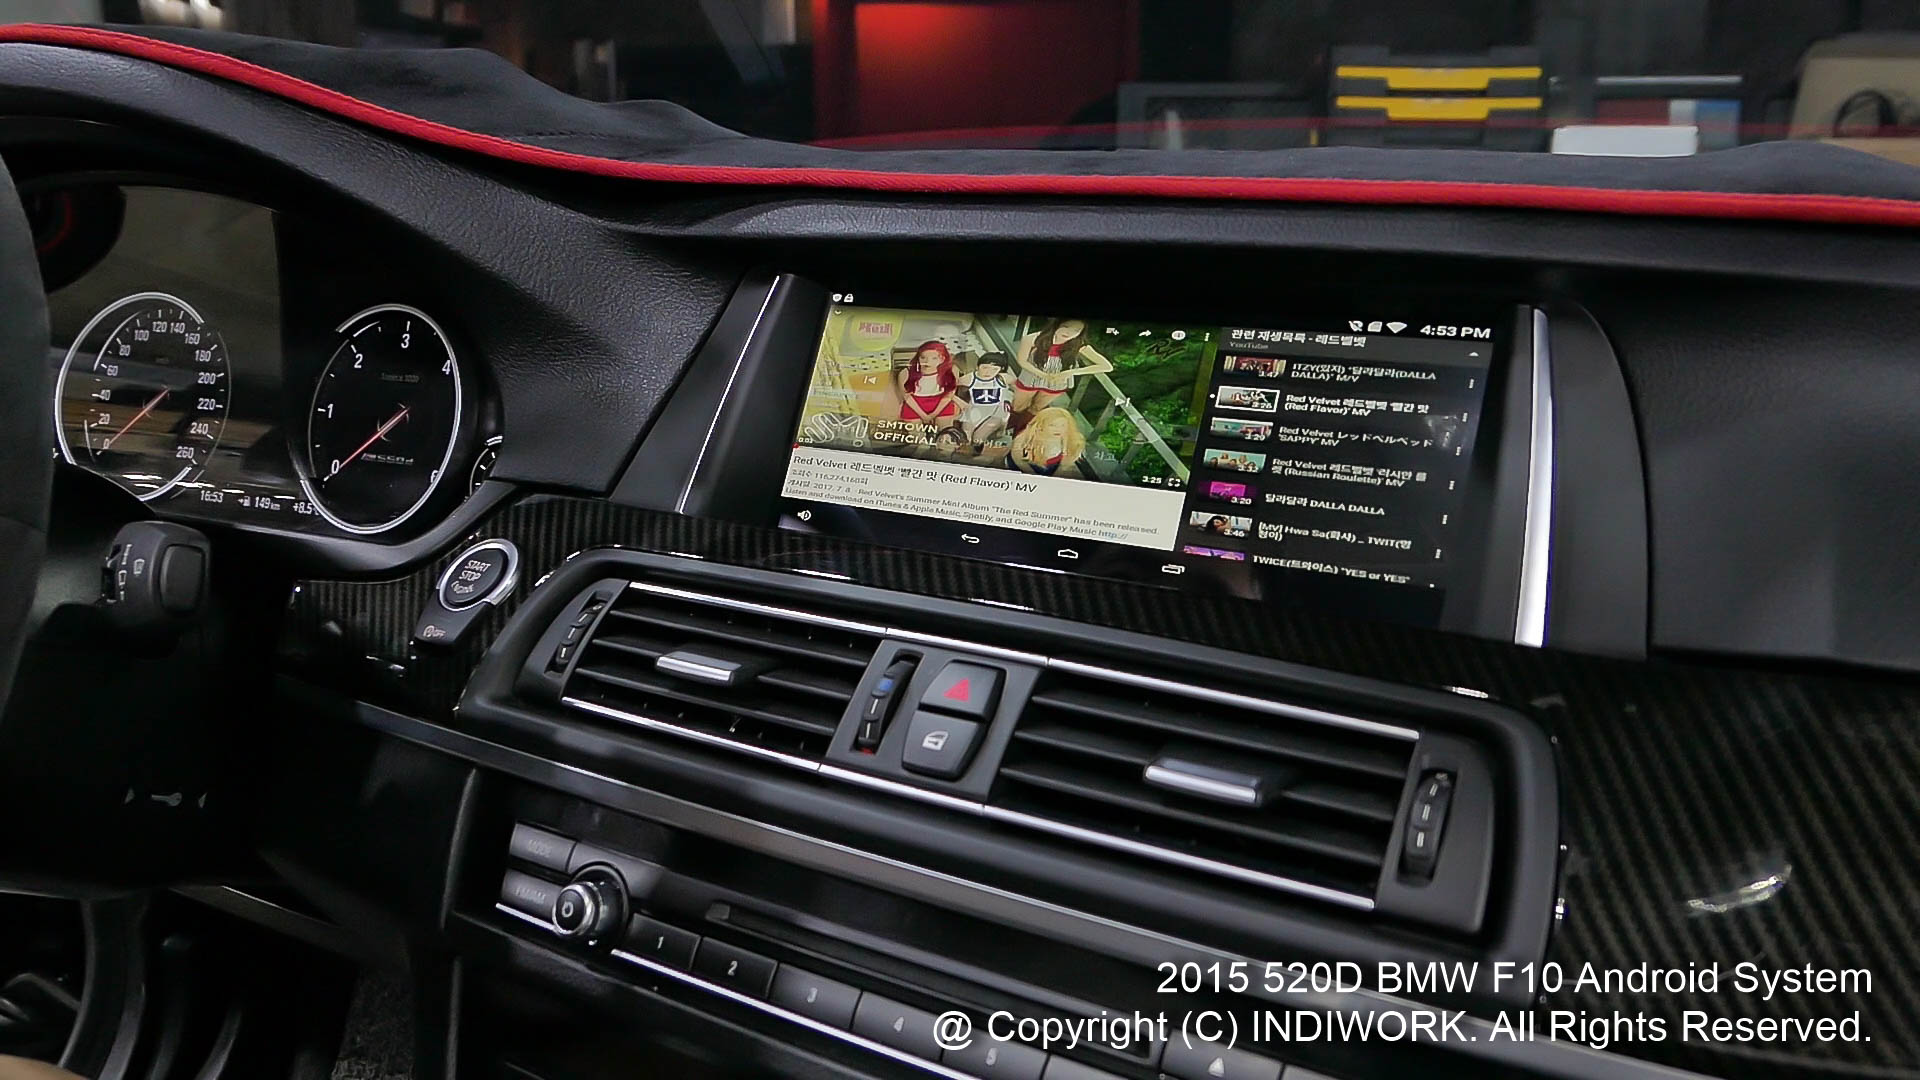 Android System for 2015 BMW F10 520D 528i "IW06B-N23,M2C-100"